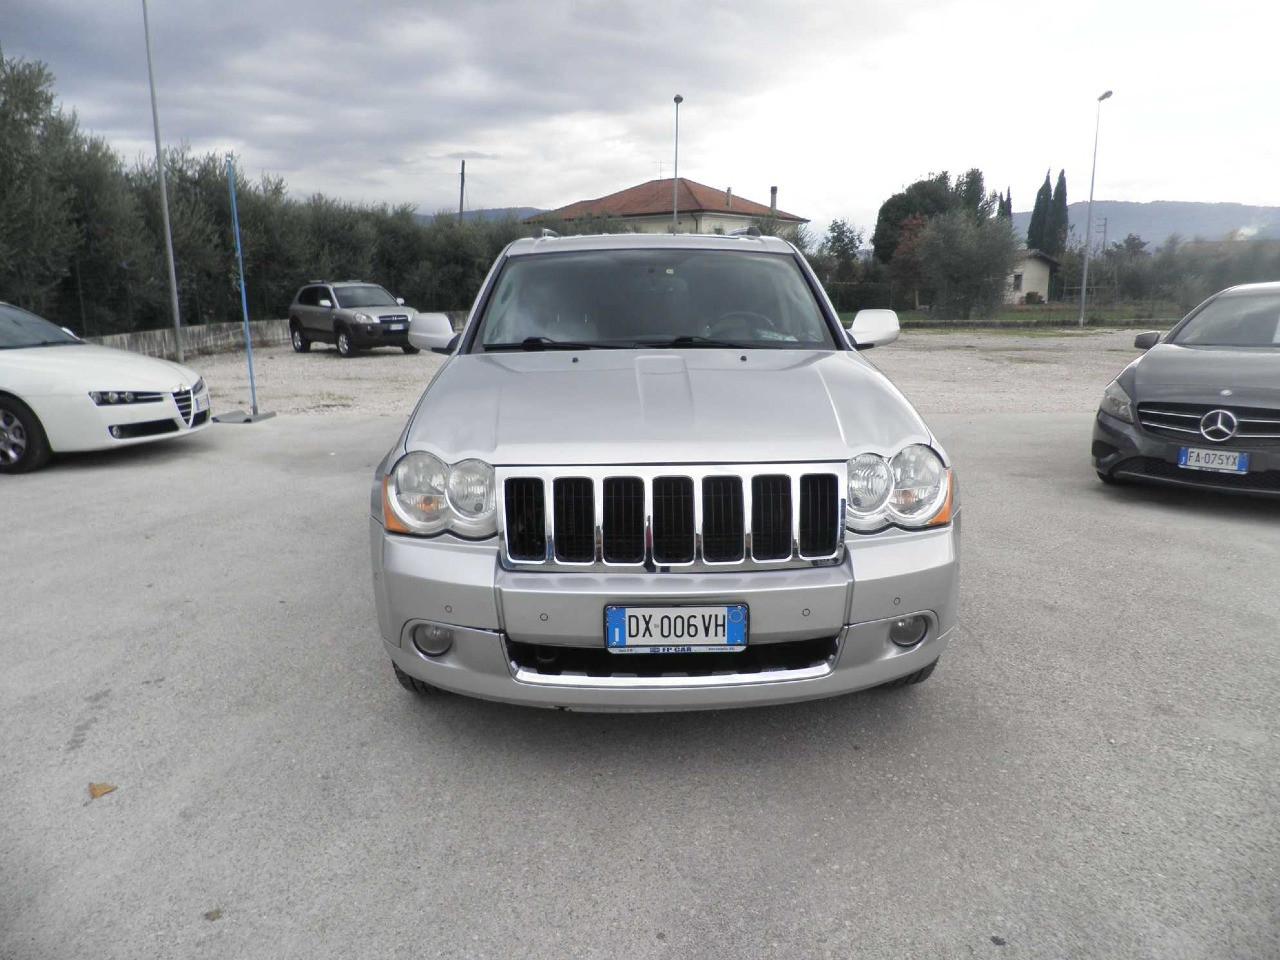 Jeep Grand Cherokee 3.0 V6 crd Limited auto